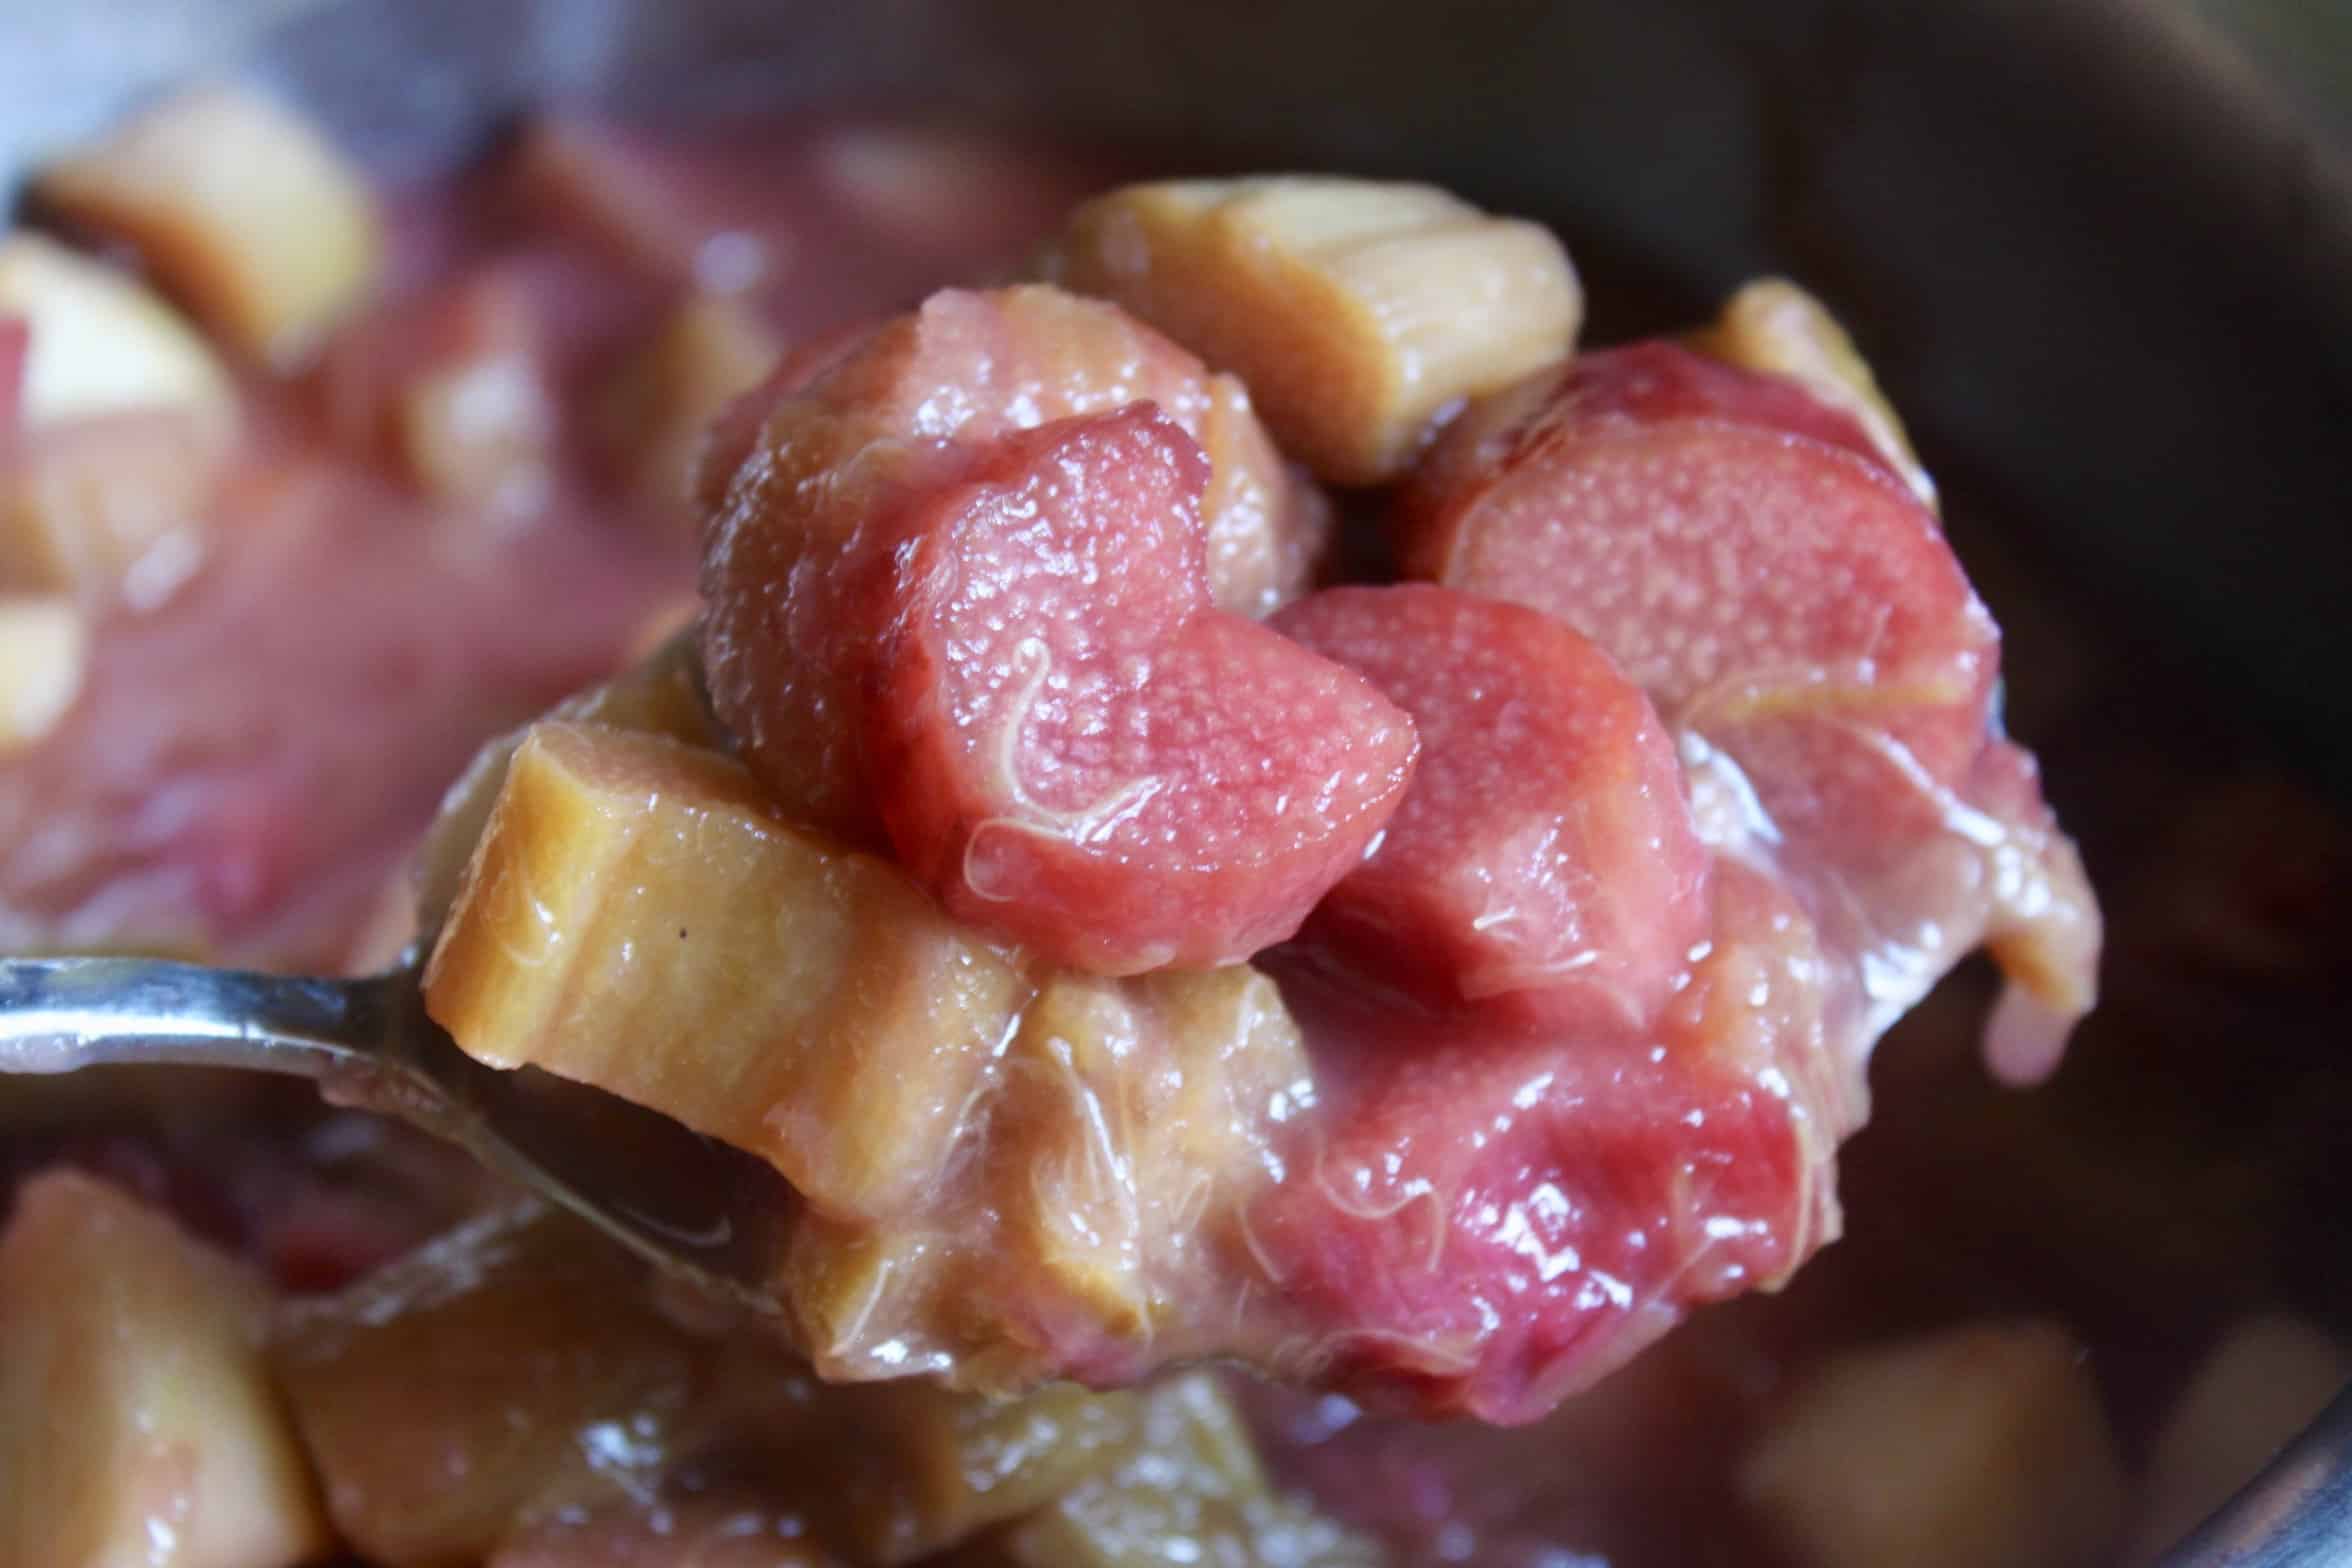 Rhubarb filling for pie